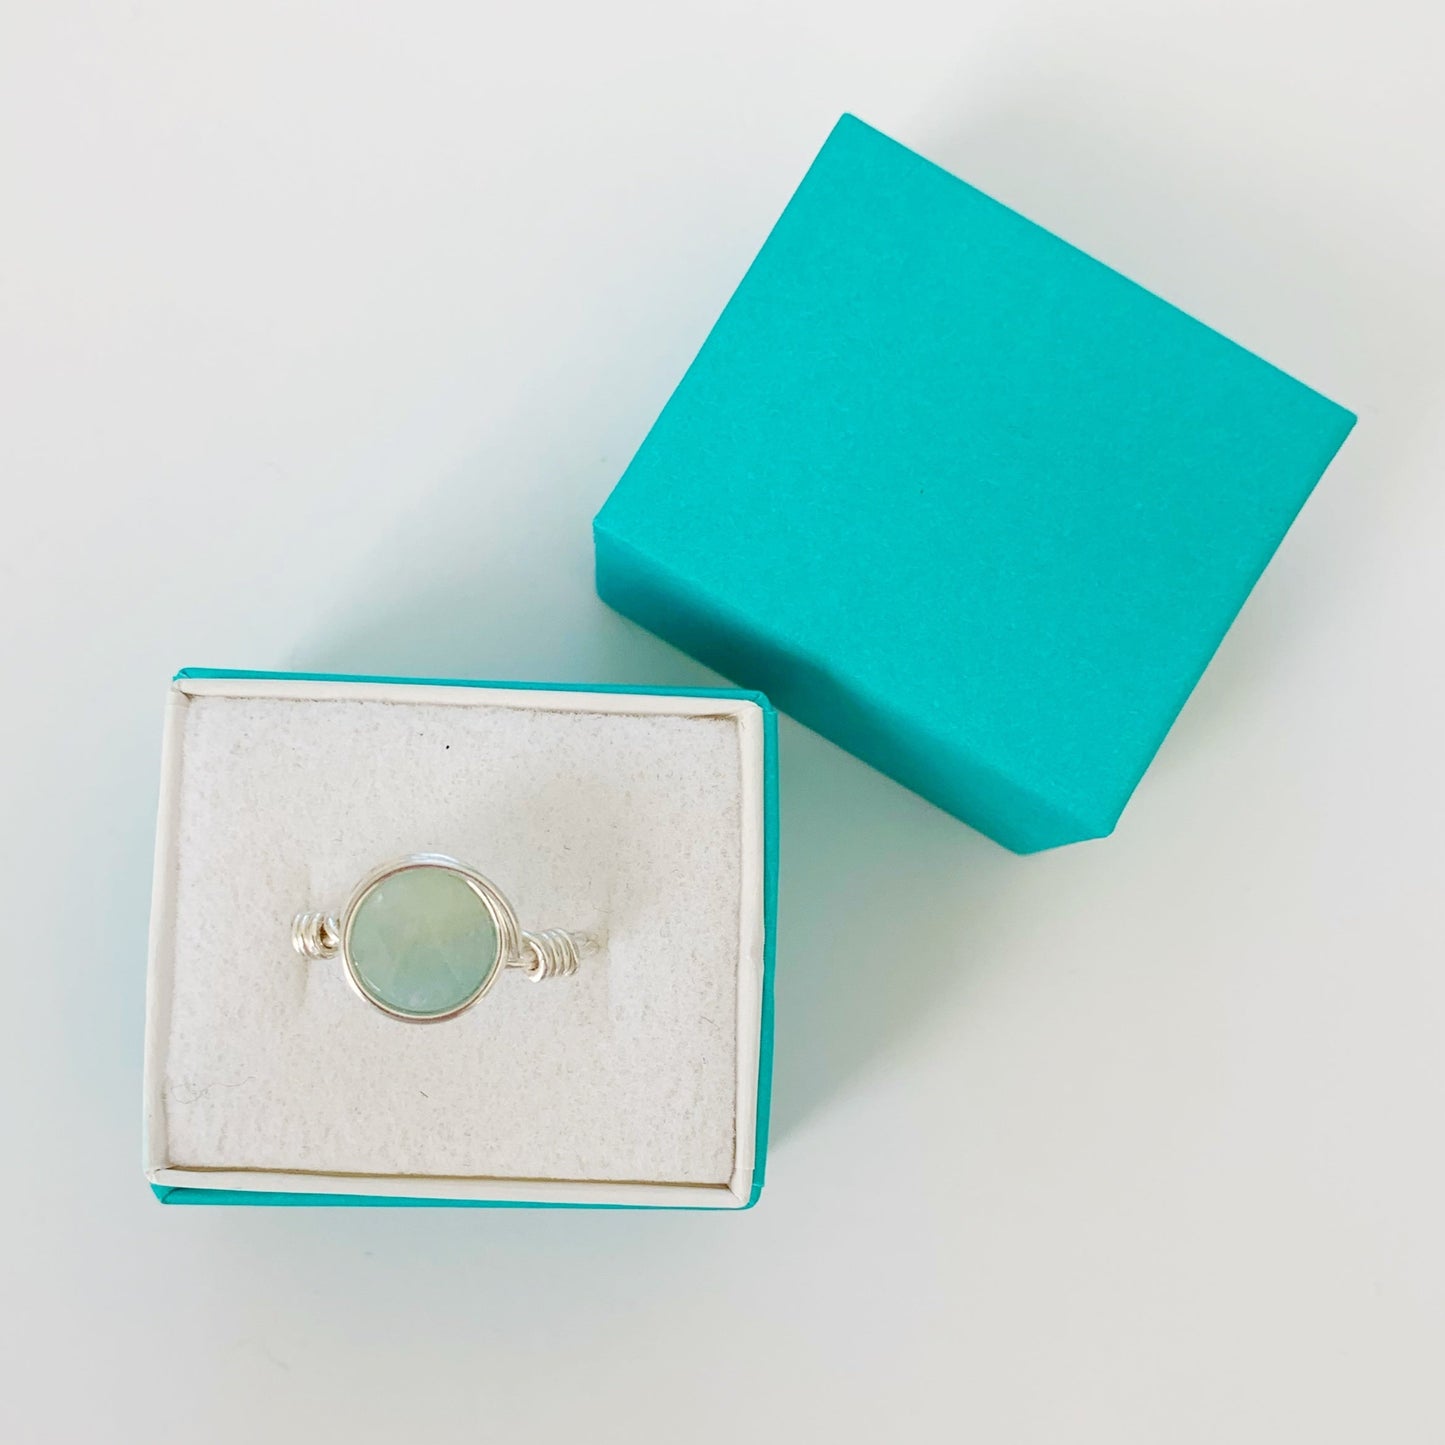 Raindrop ring in sterling silver with aquamarine pictured here in a teal ring box on a white surface